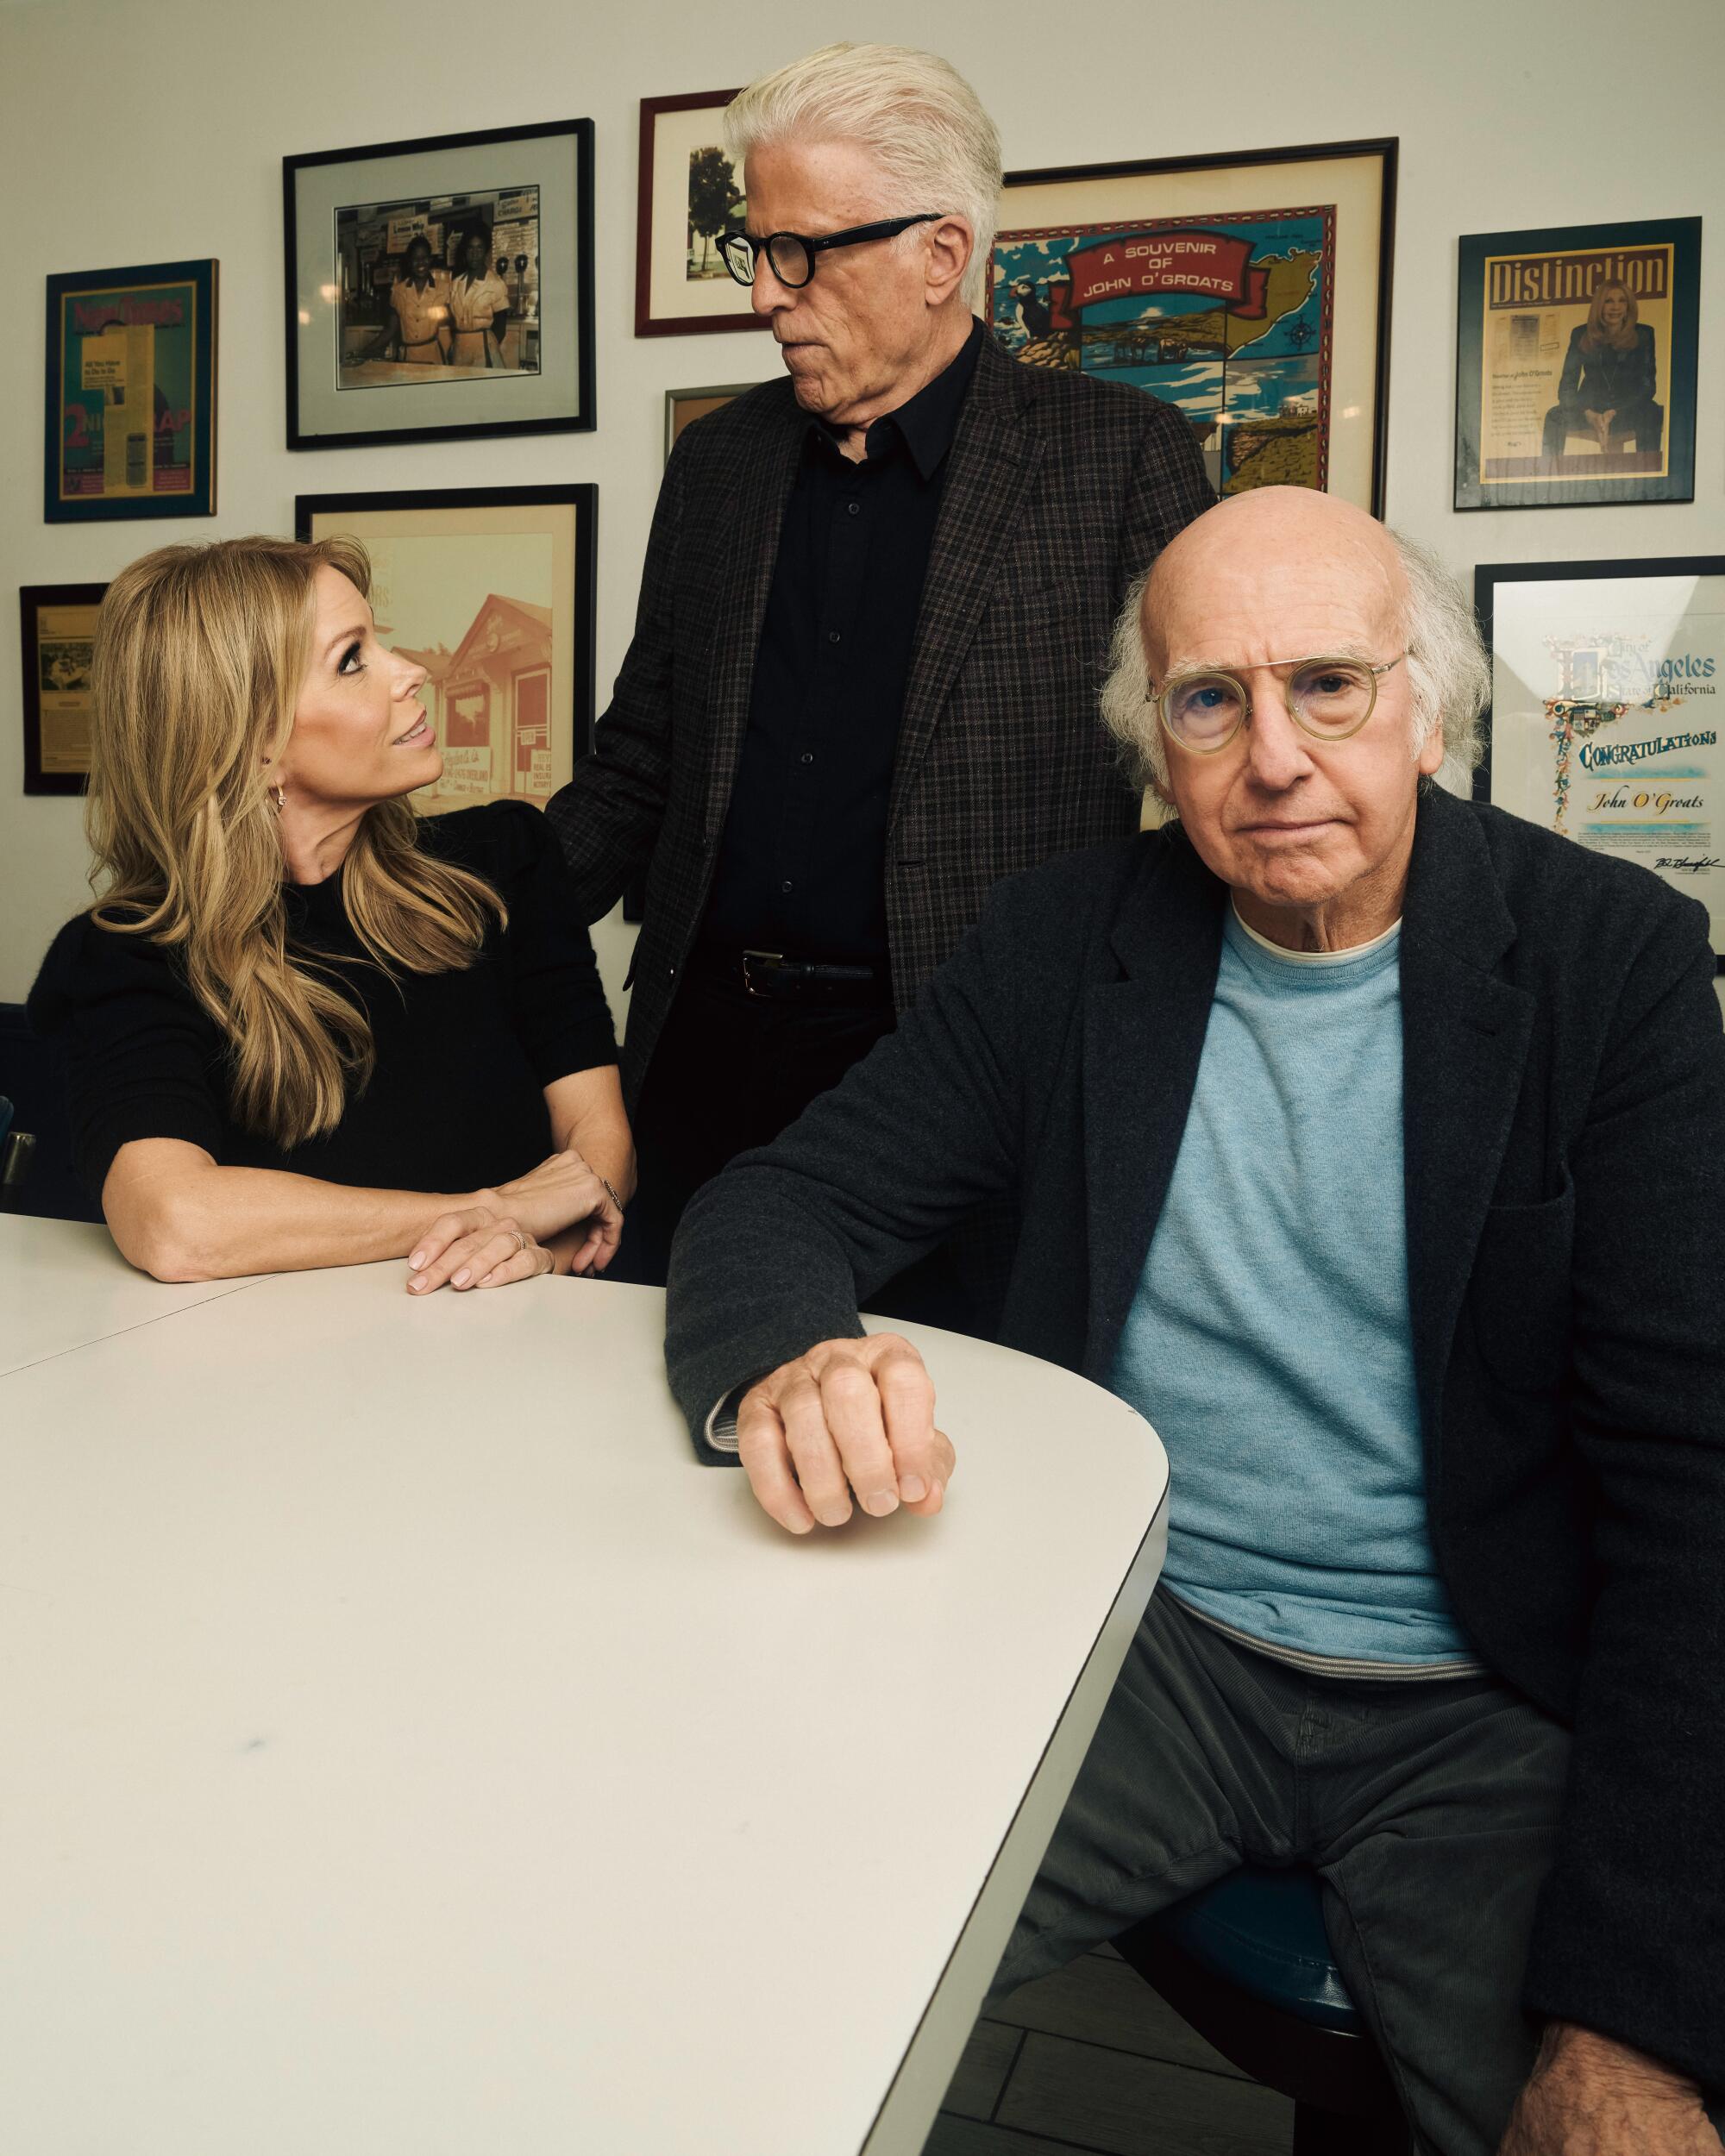 Cheryl Hines, Ted Danson and Larry David in John O'Groats diner in Los Angeles, CA . 